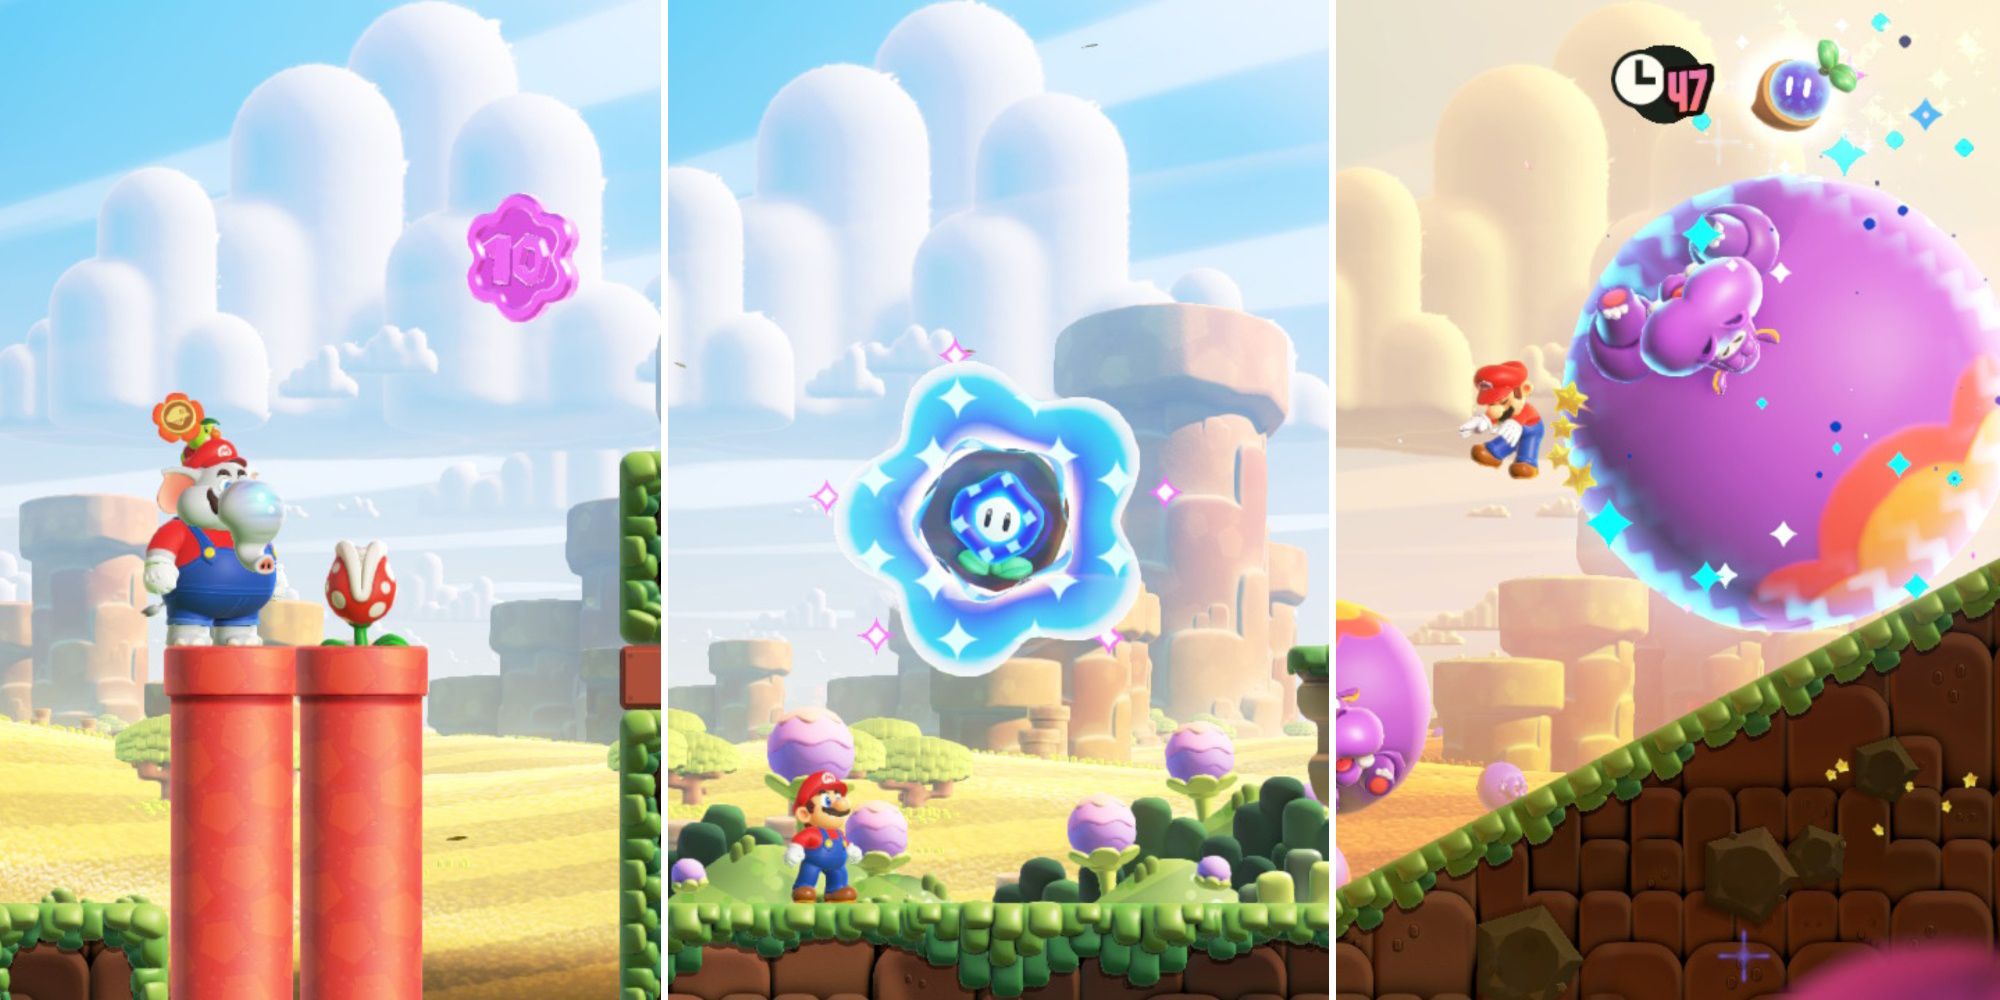 A three-panel image from Super Mario Bros Wonder showing elephant mario with a large purple coin, mario with the wonder flower, and a giant hoppo holding a wonder seed.